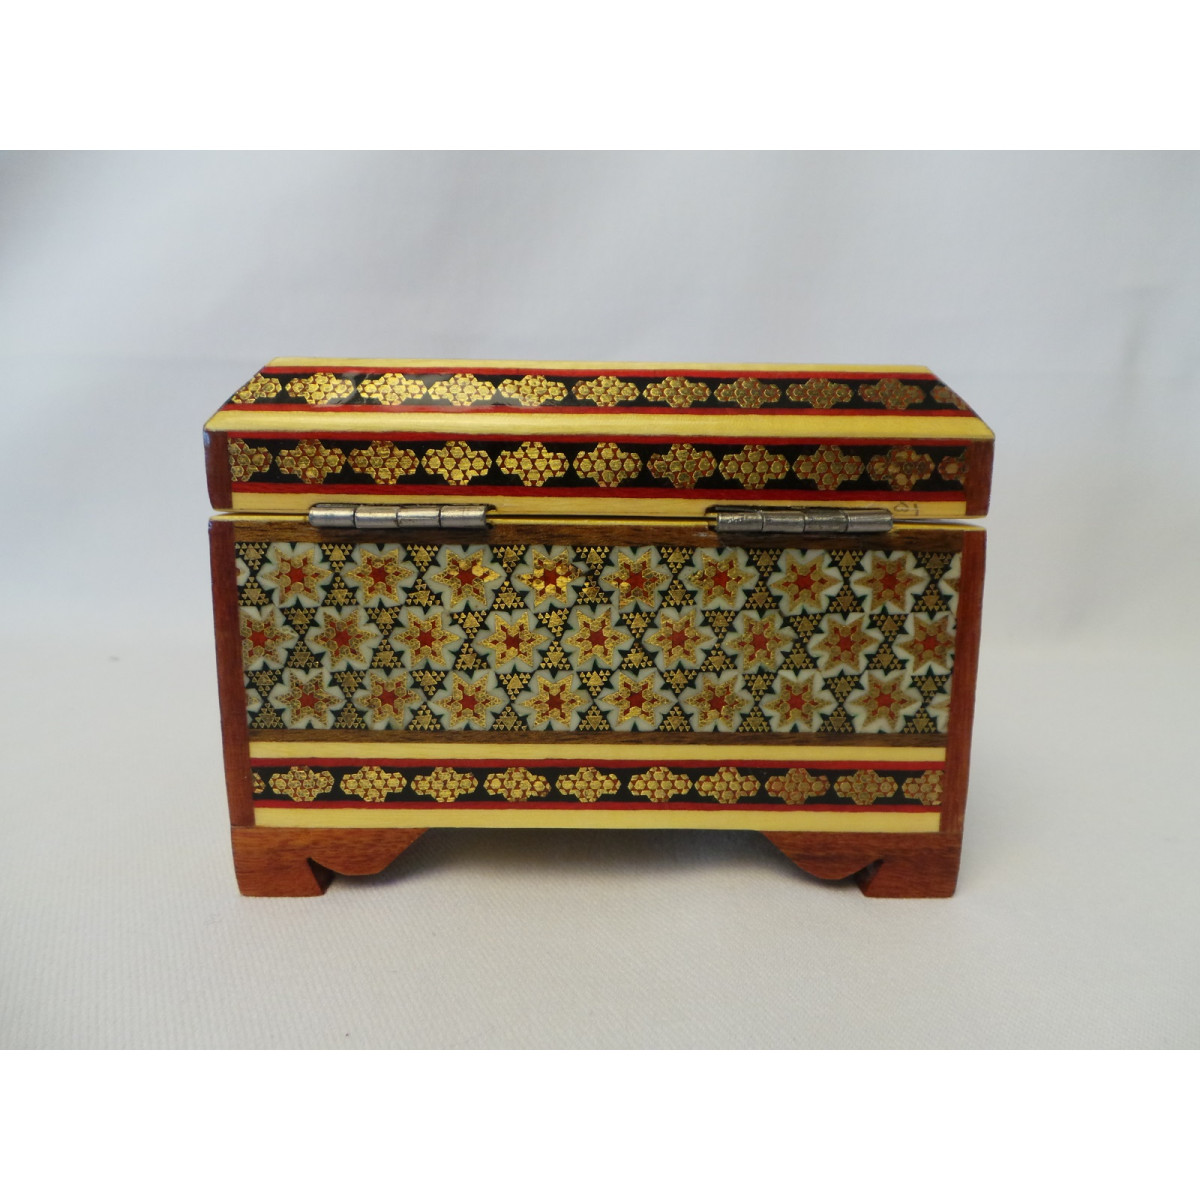 Wood and Copper Inlaying Jewelry Box - HI1011-Persian Handicrafts